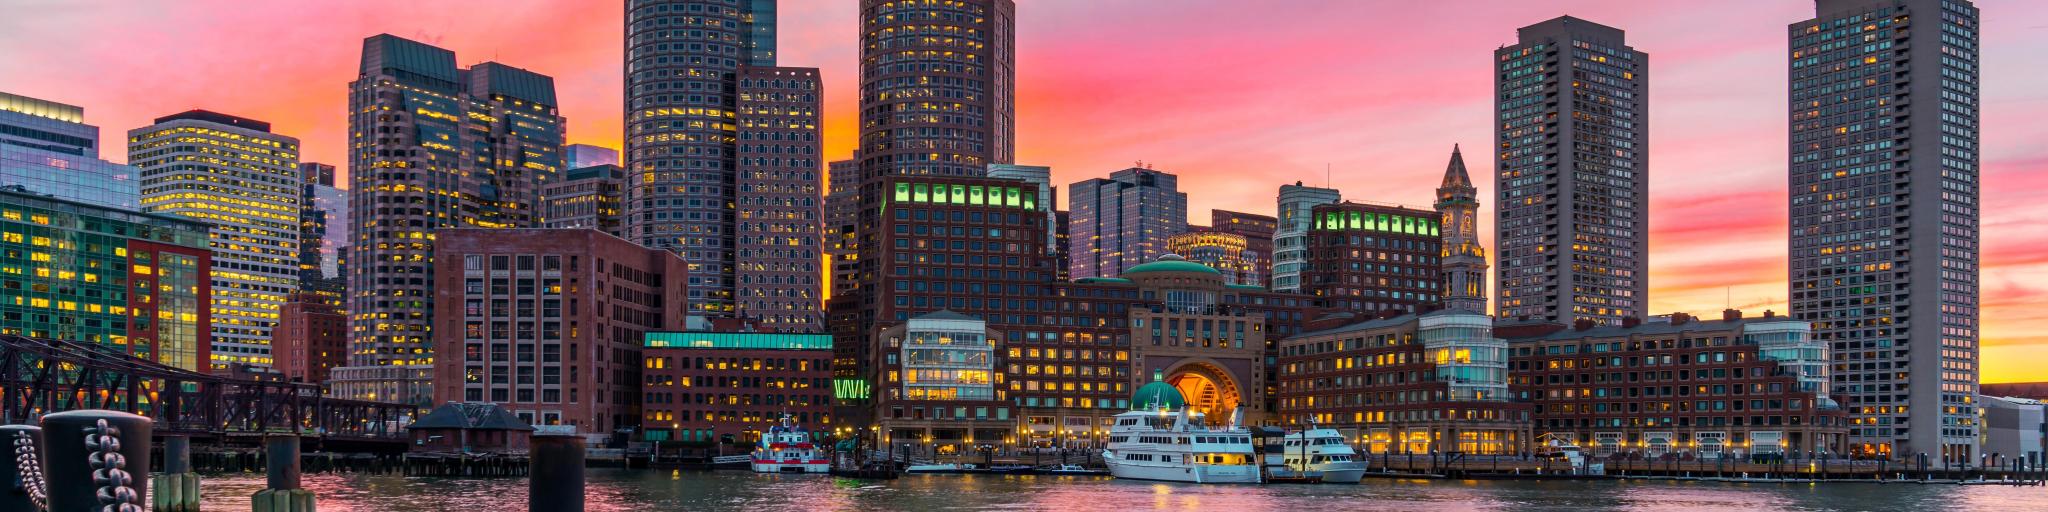 Boston, Massachusetts, USA with the city skyline and Fort Point Channel at sunset as viewed from Fan Pier Park.